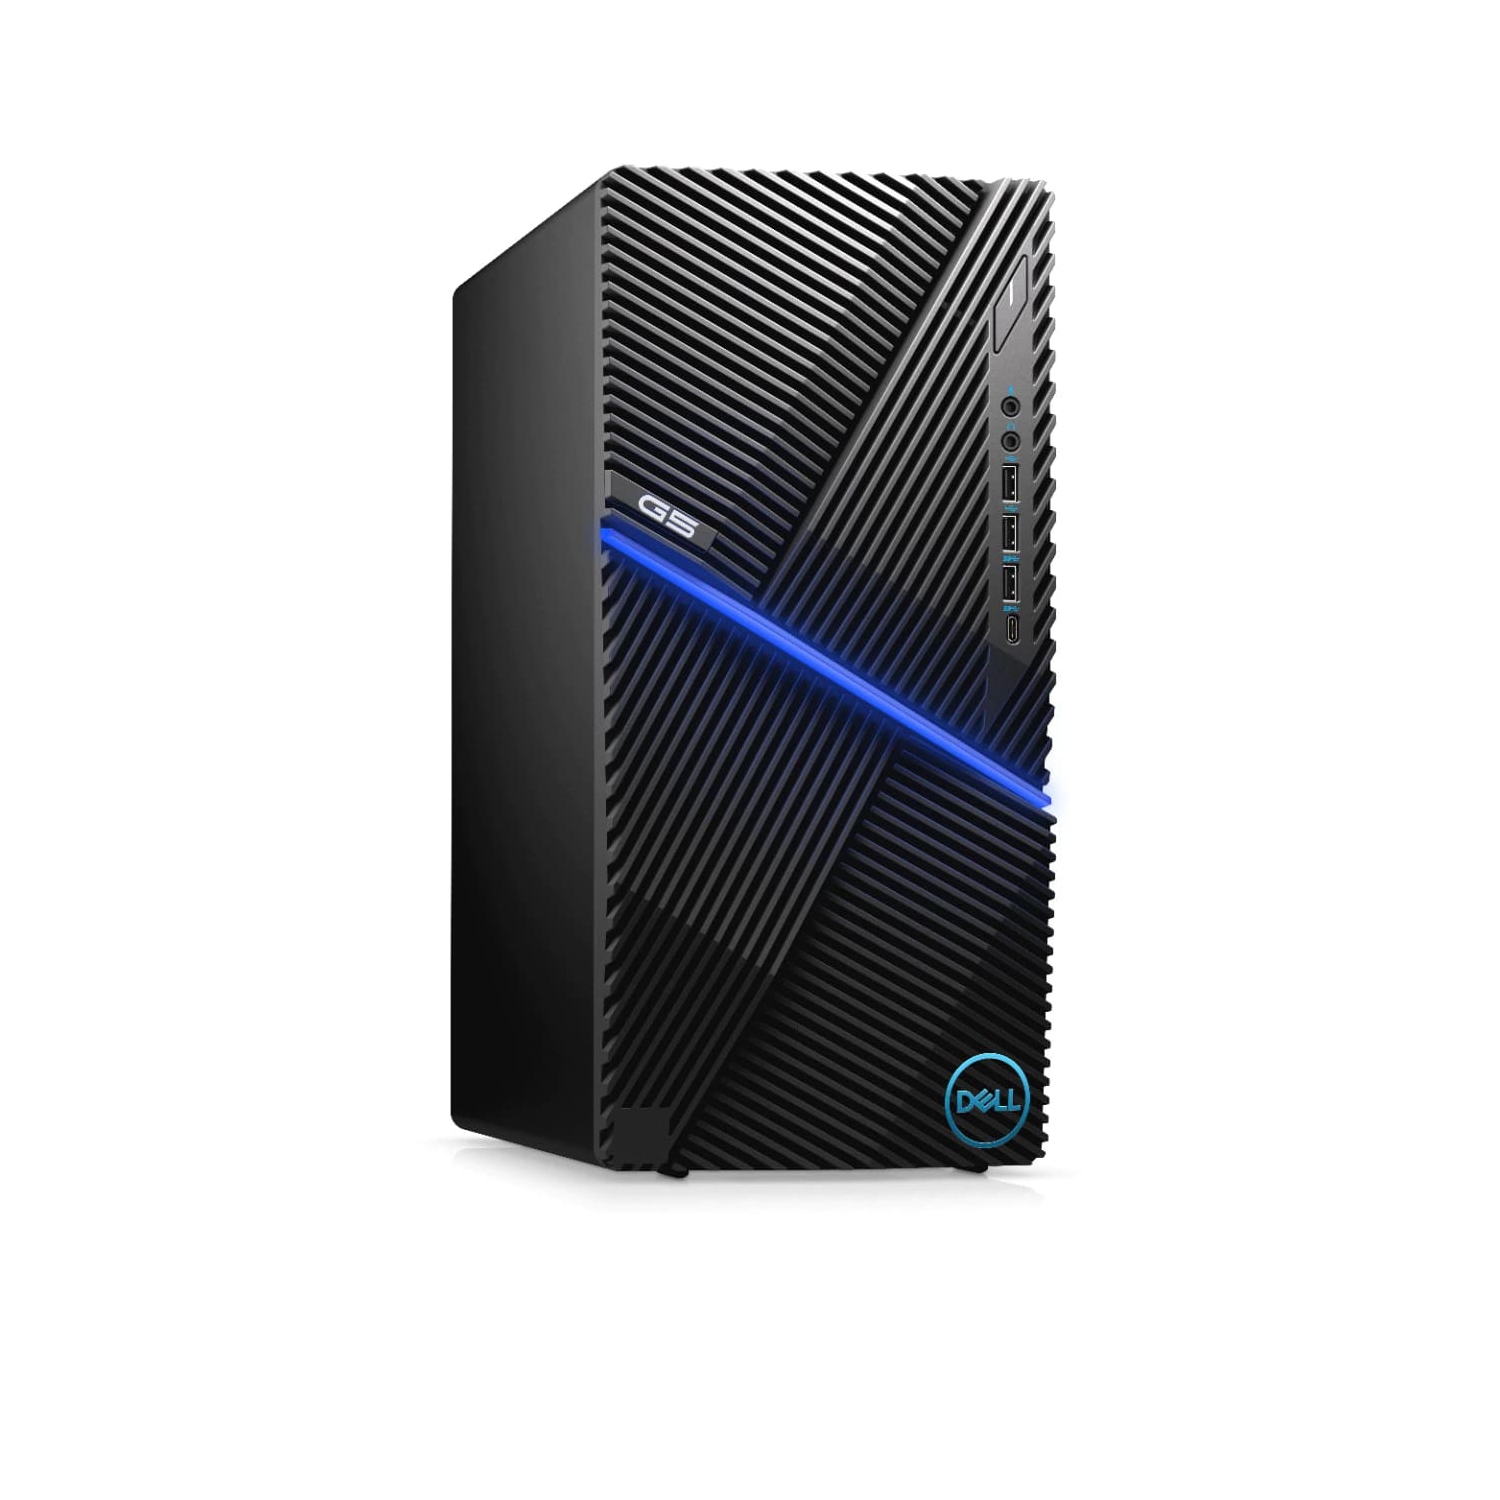 Refurbished (Excellent) - Dell G5 5000 Gaming Desktop (2020), Core i7 - 2TB HDD + 512GB SSD - 32GB RAM - RTX 2060, 8 Cores @ 5.1 GHz - 10th Gen CPU Certified Refurbished